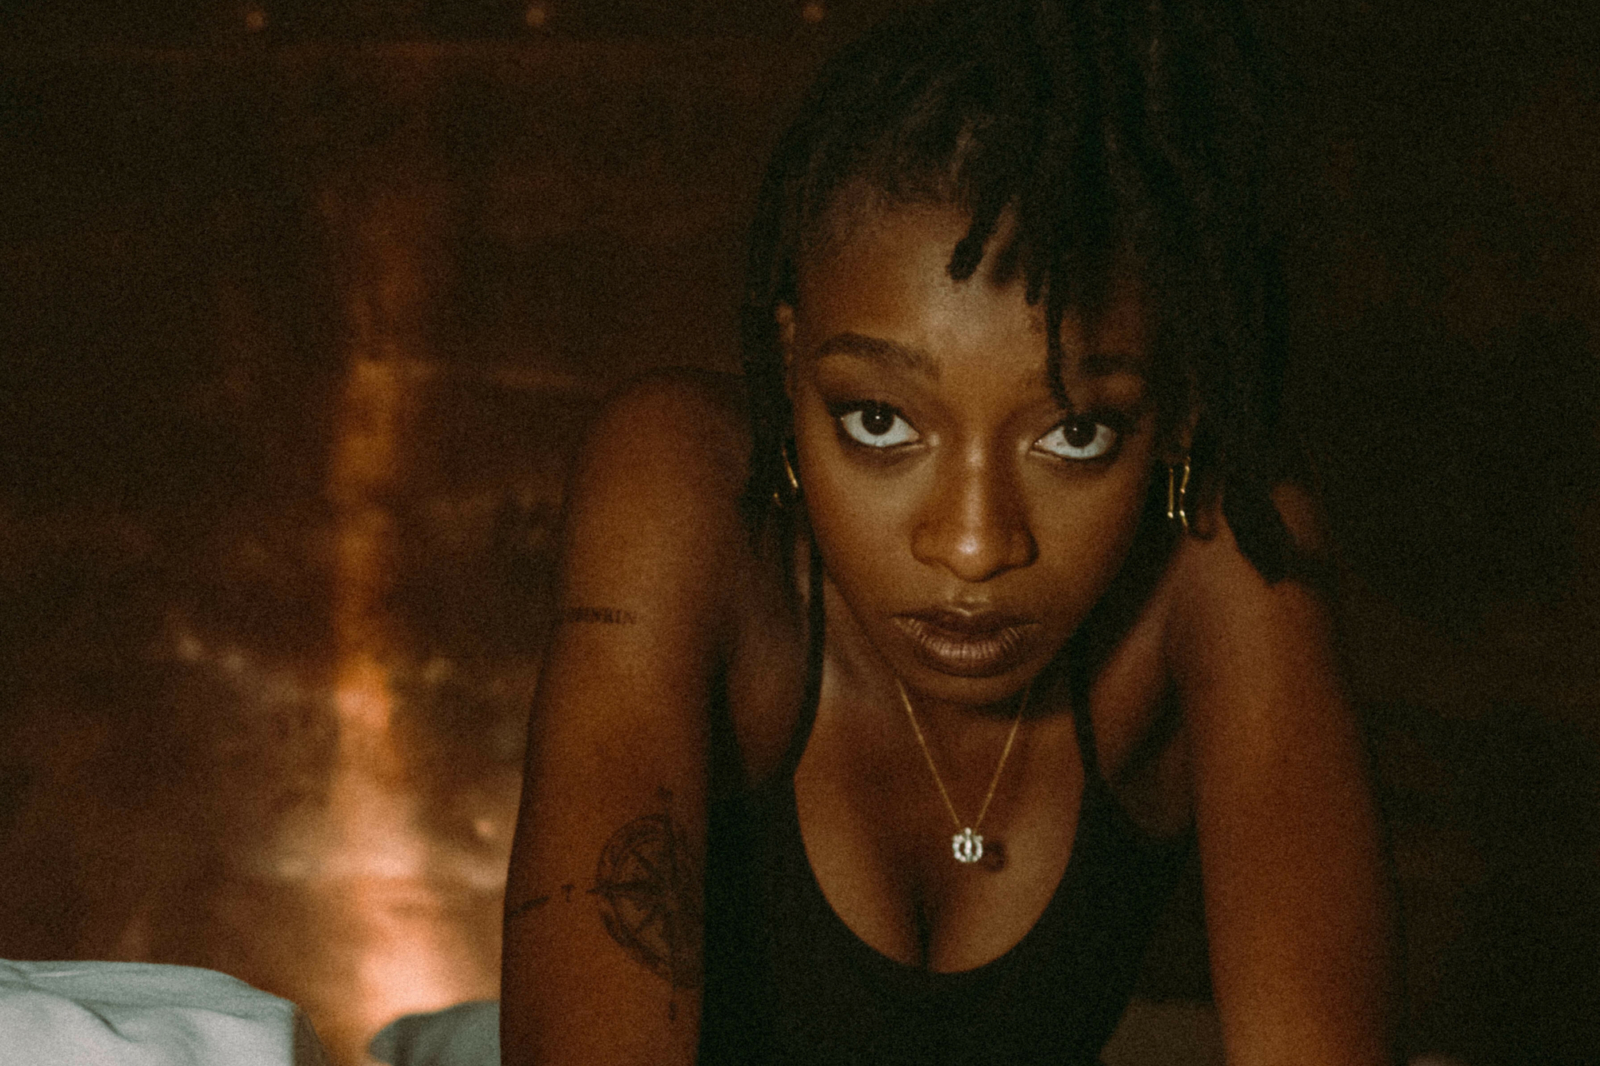 Little Simz releases new album 'No Thank You'